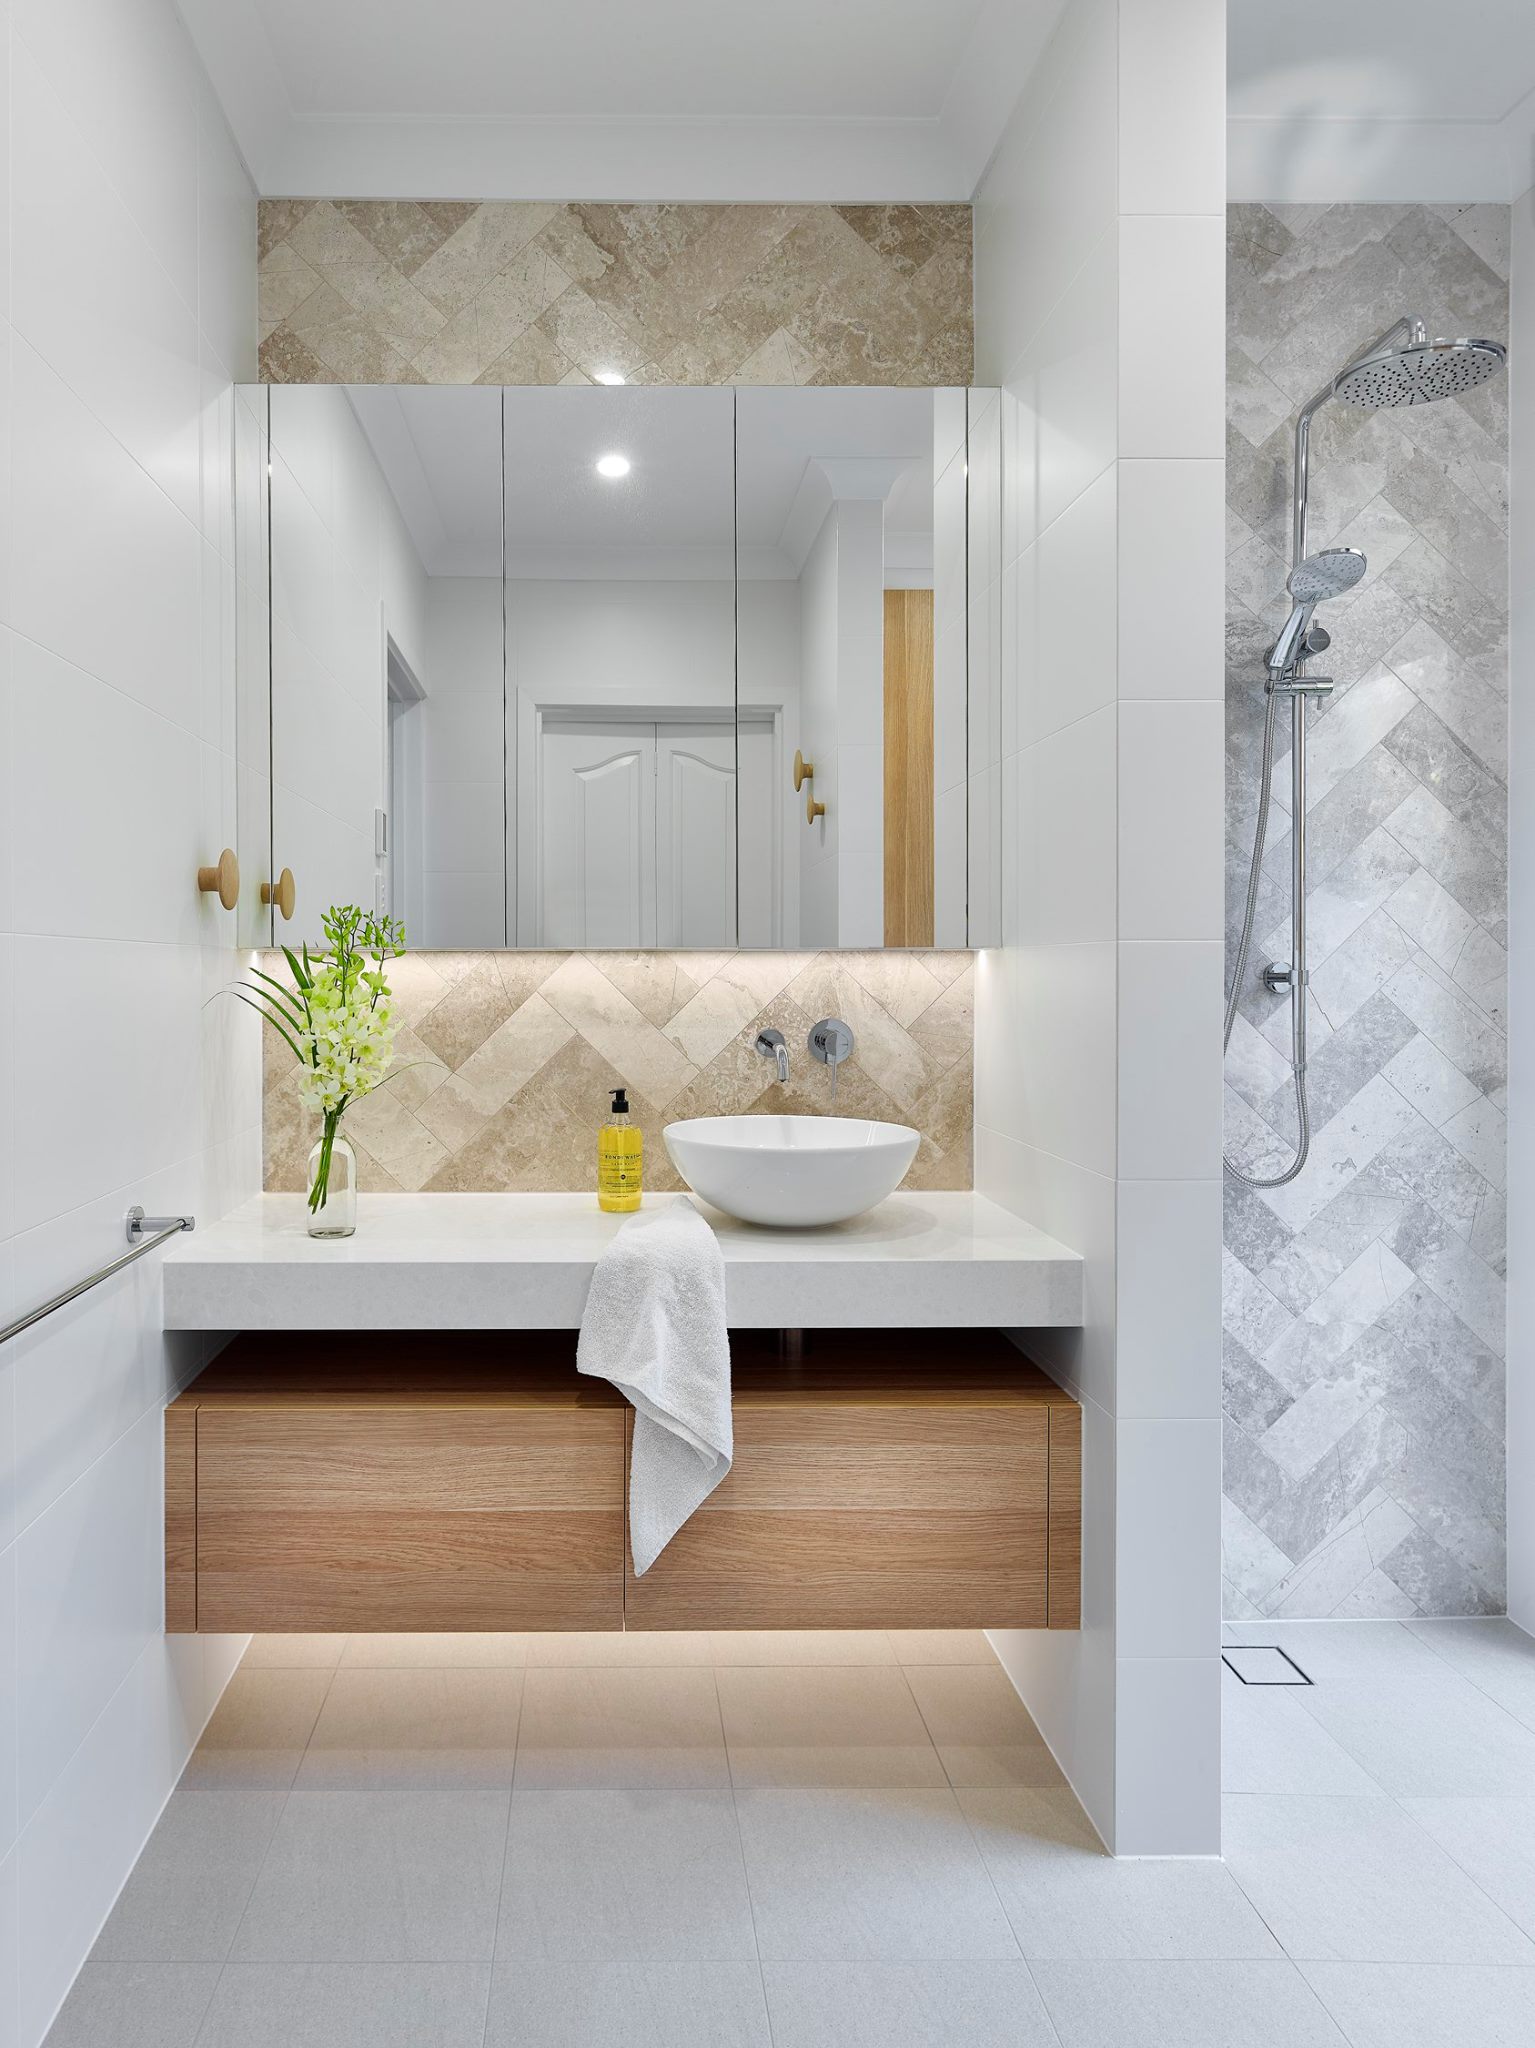 Bathroom With faucet - design inspiration in Gympie, QLD